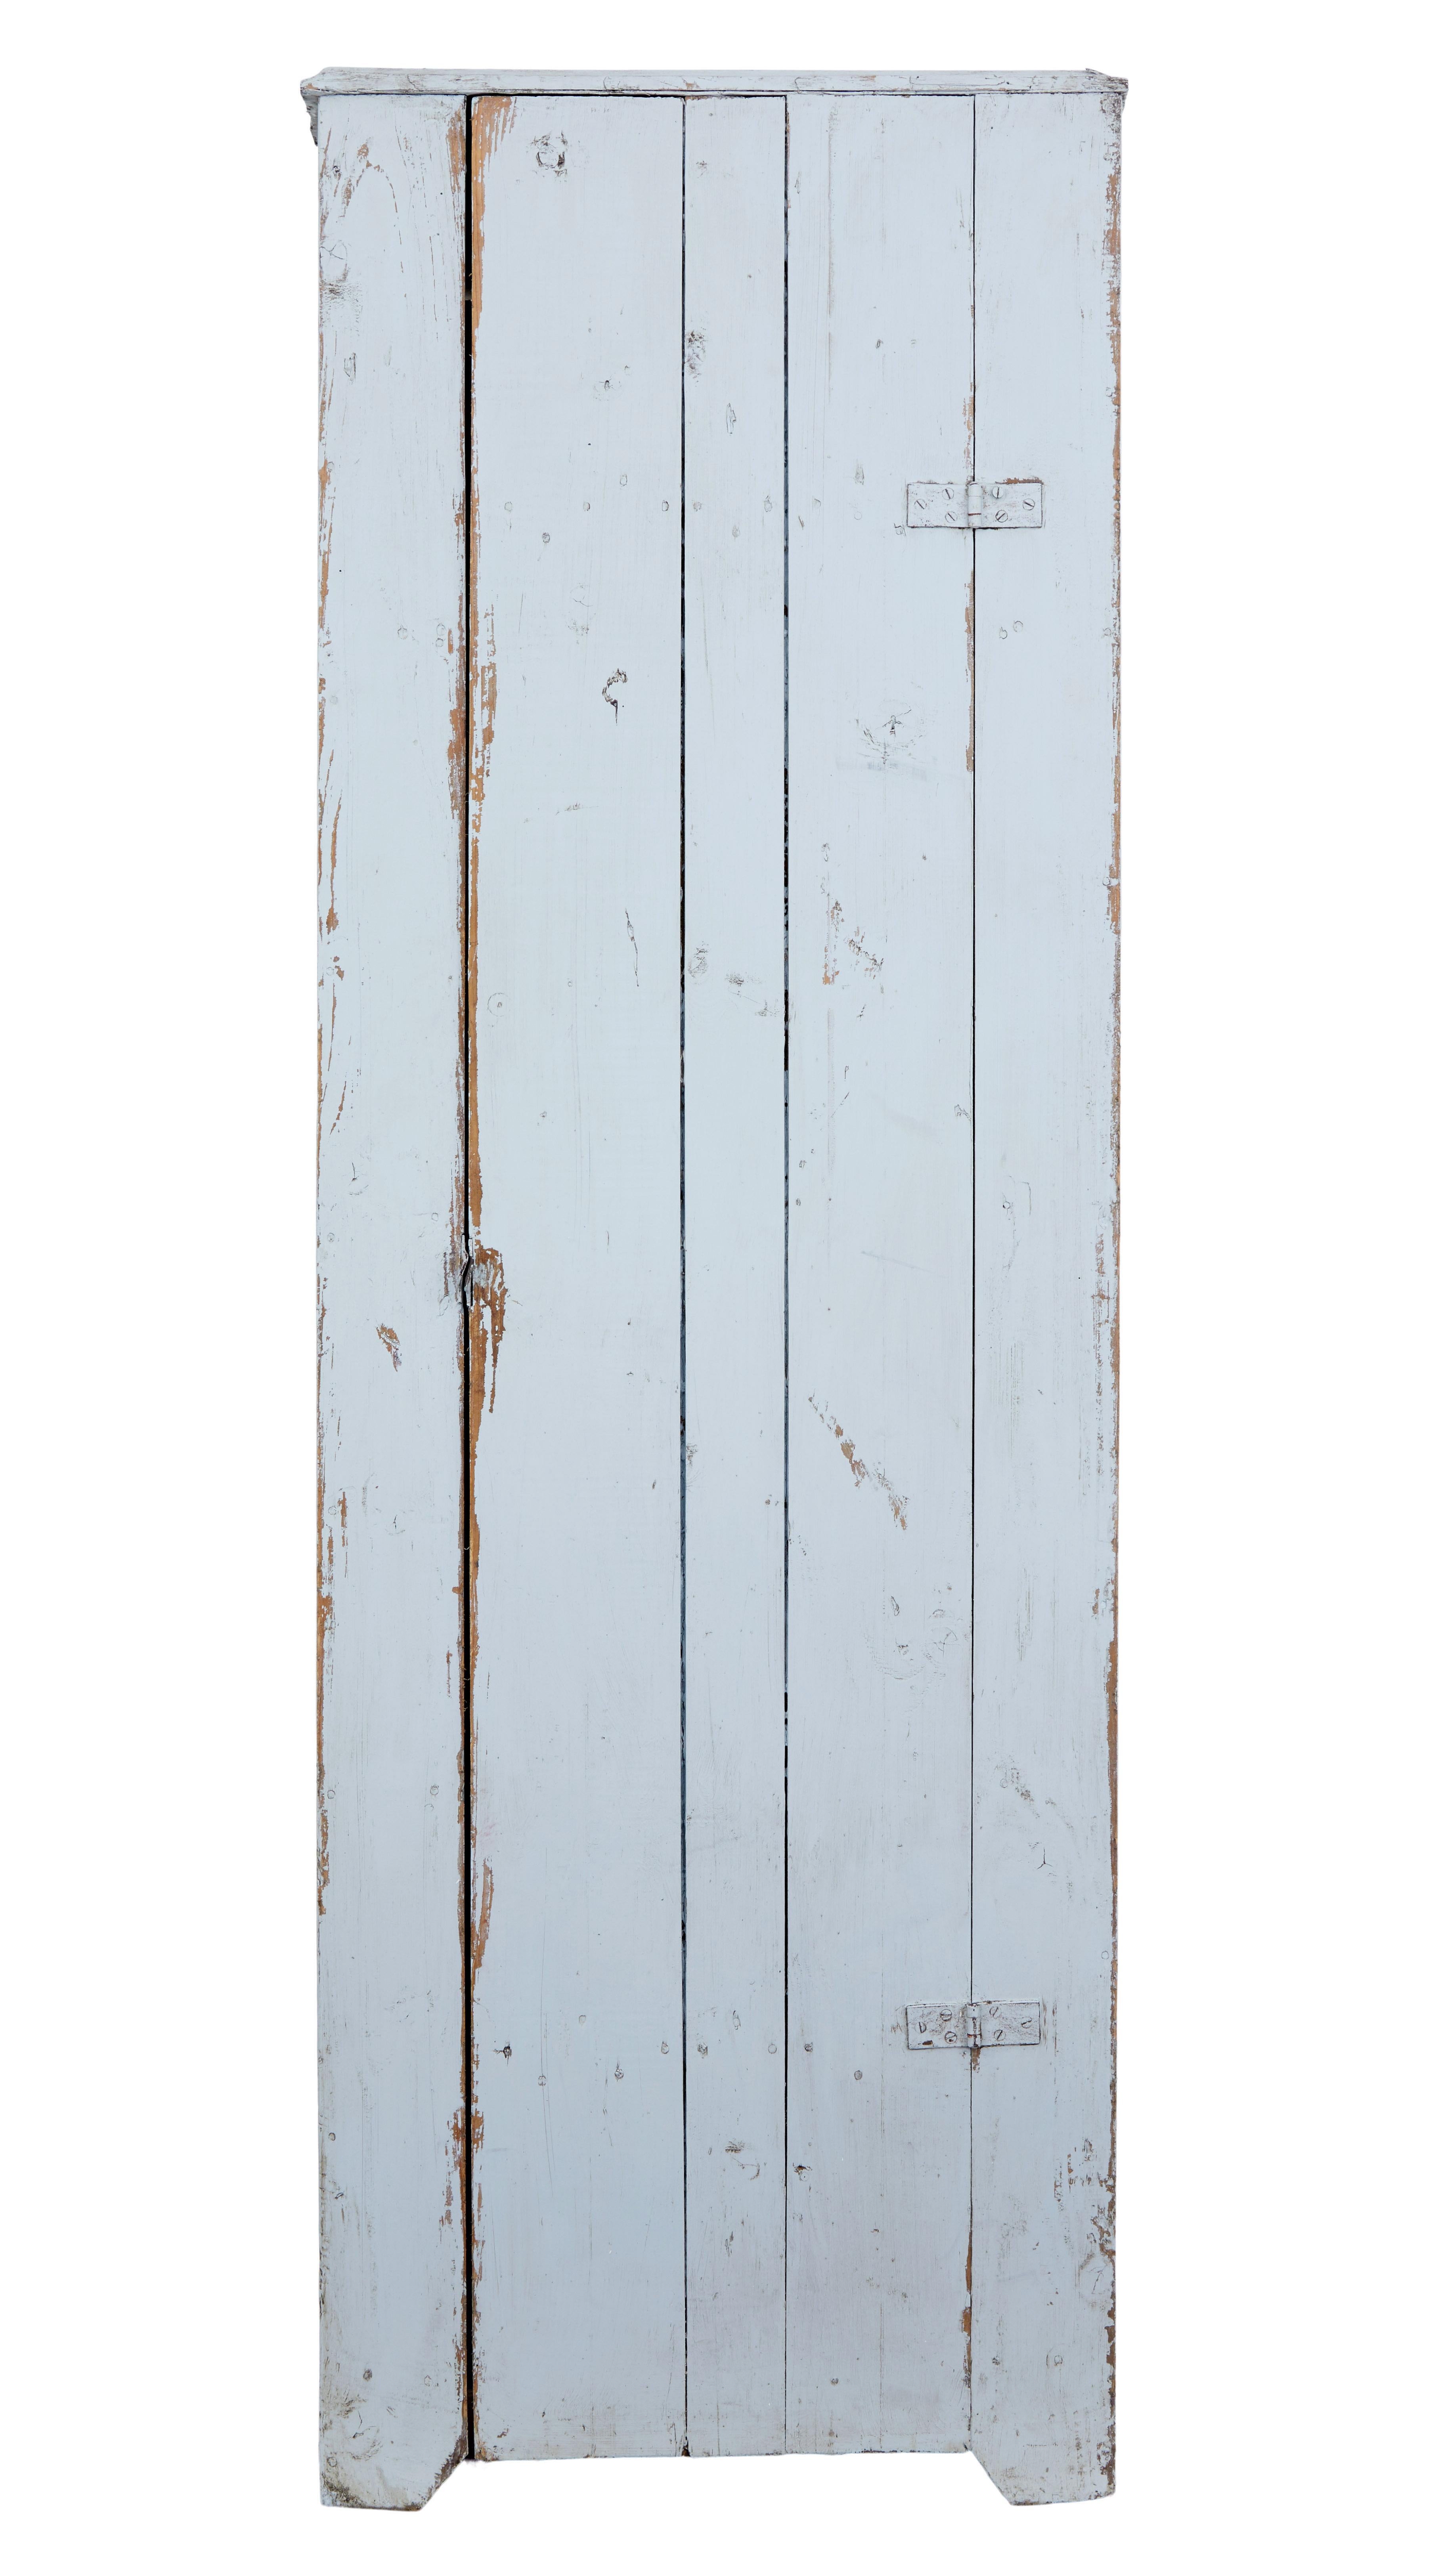 19th century Scandinavian painted pine kitchen cupboard, circa 1890.

Useful narrow painted pine cupboard, using pine boards. Single door opens to reveal 3 shelves in a fixed position.

Ideal for use in small spaces to provide maximum